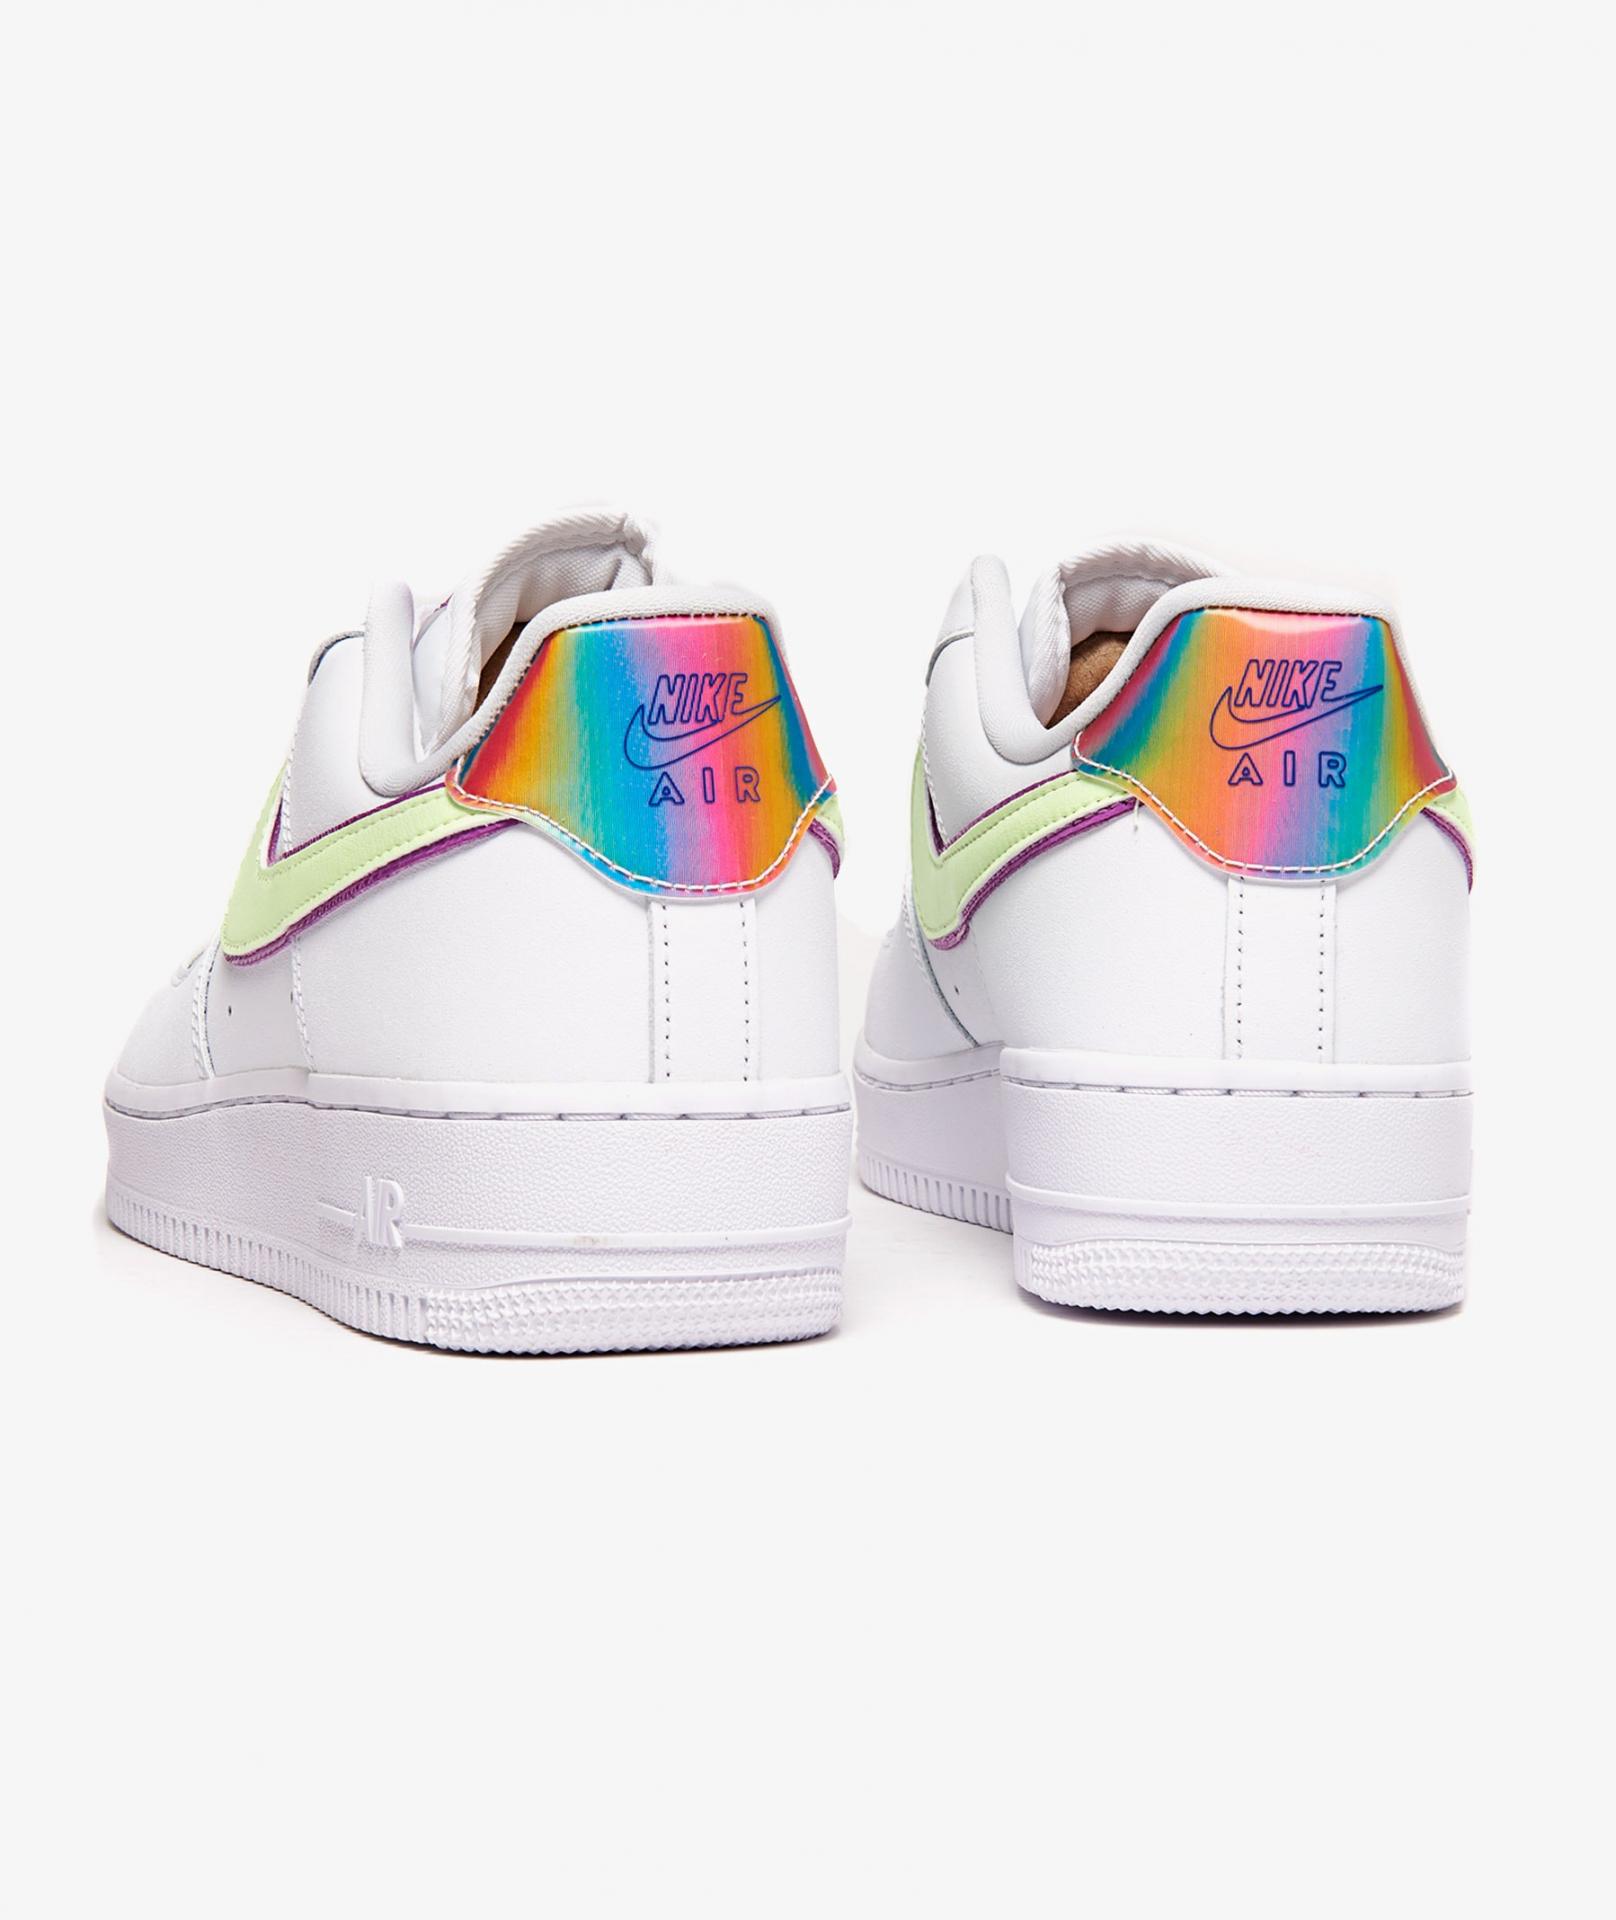 AIR FORCE 1 EASTER 75,00 € NIKE AIR FORCE 1